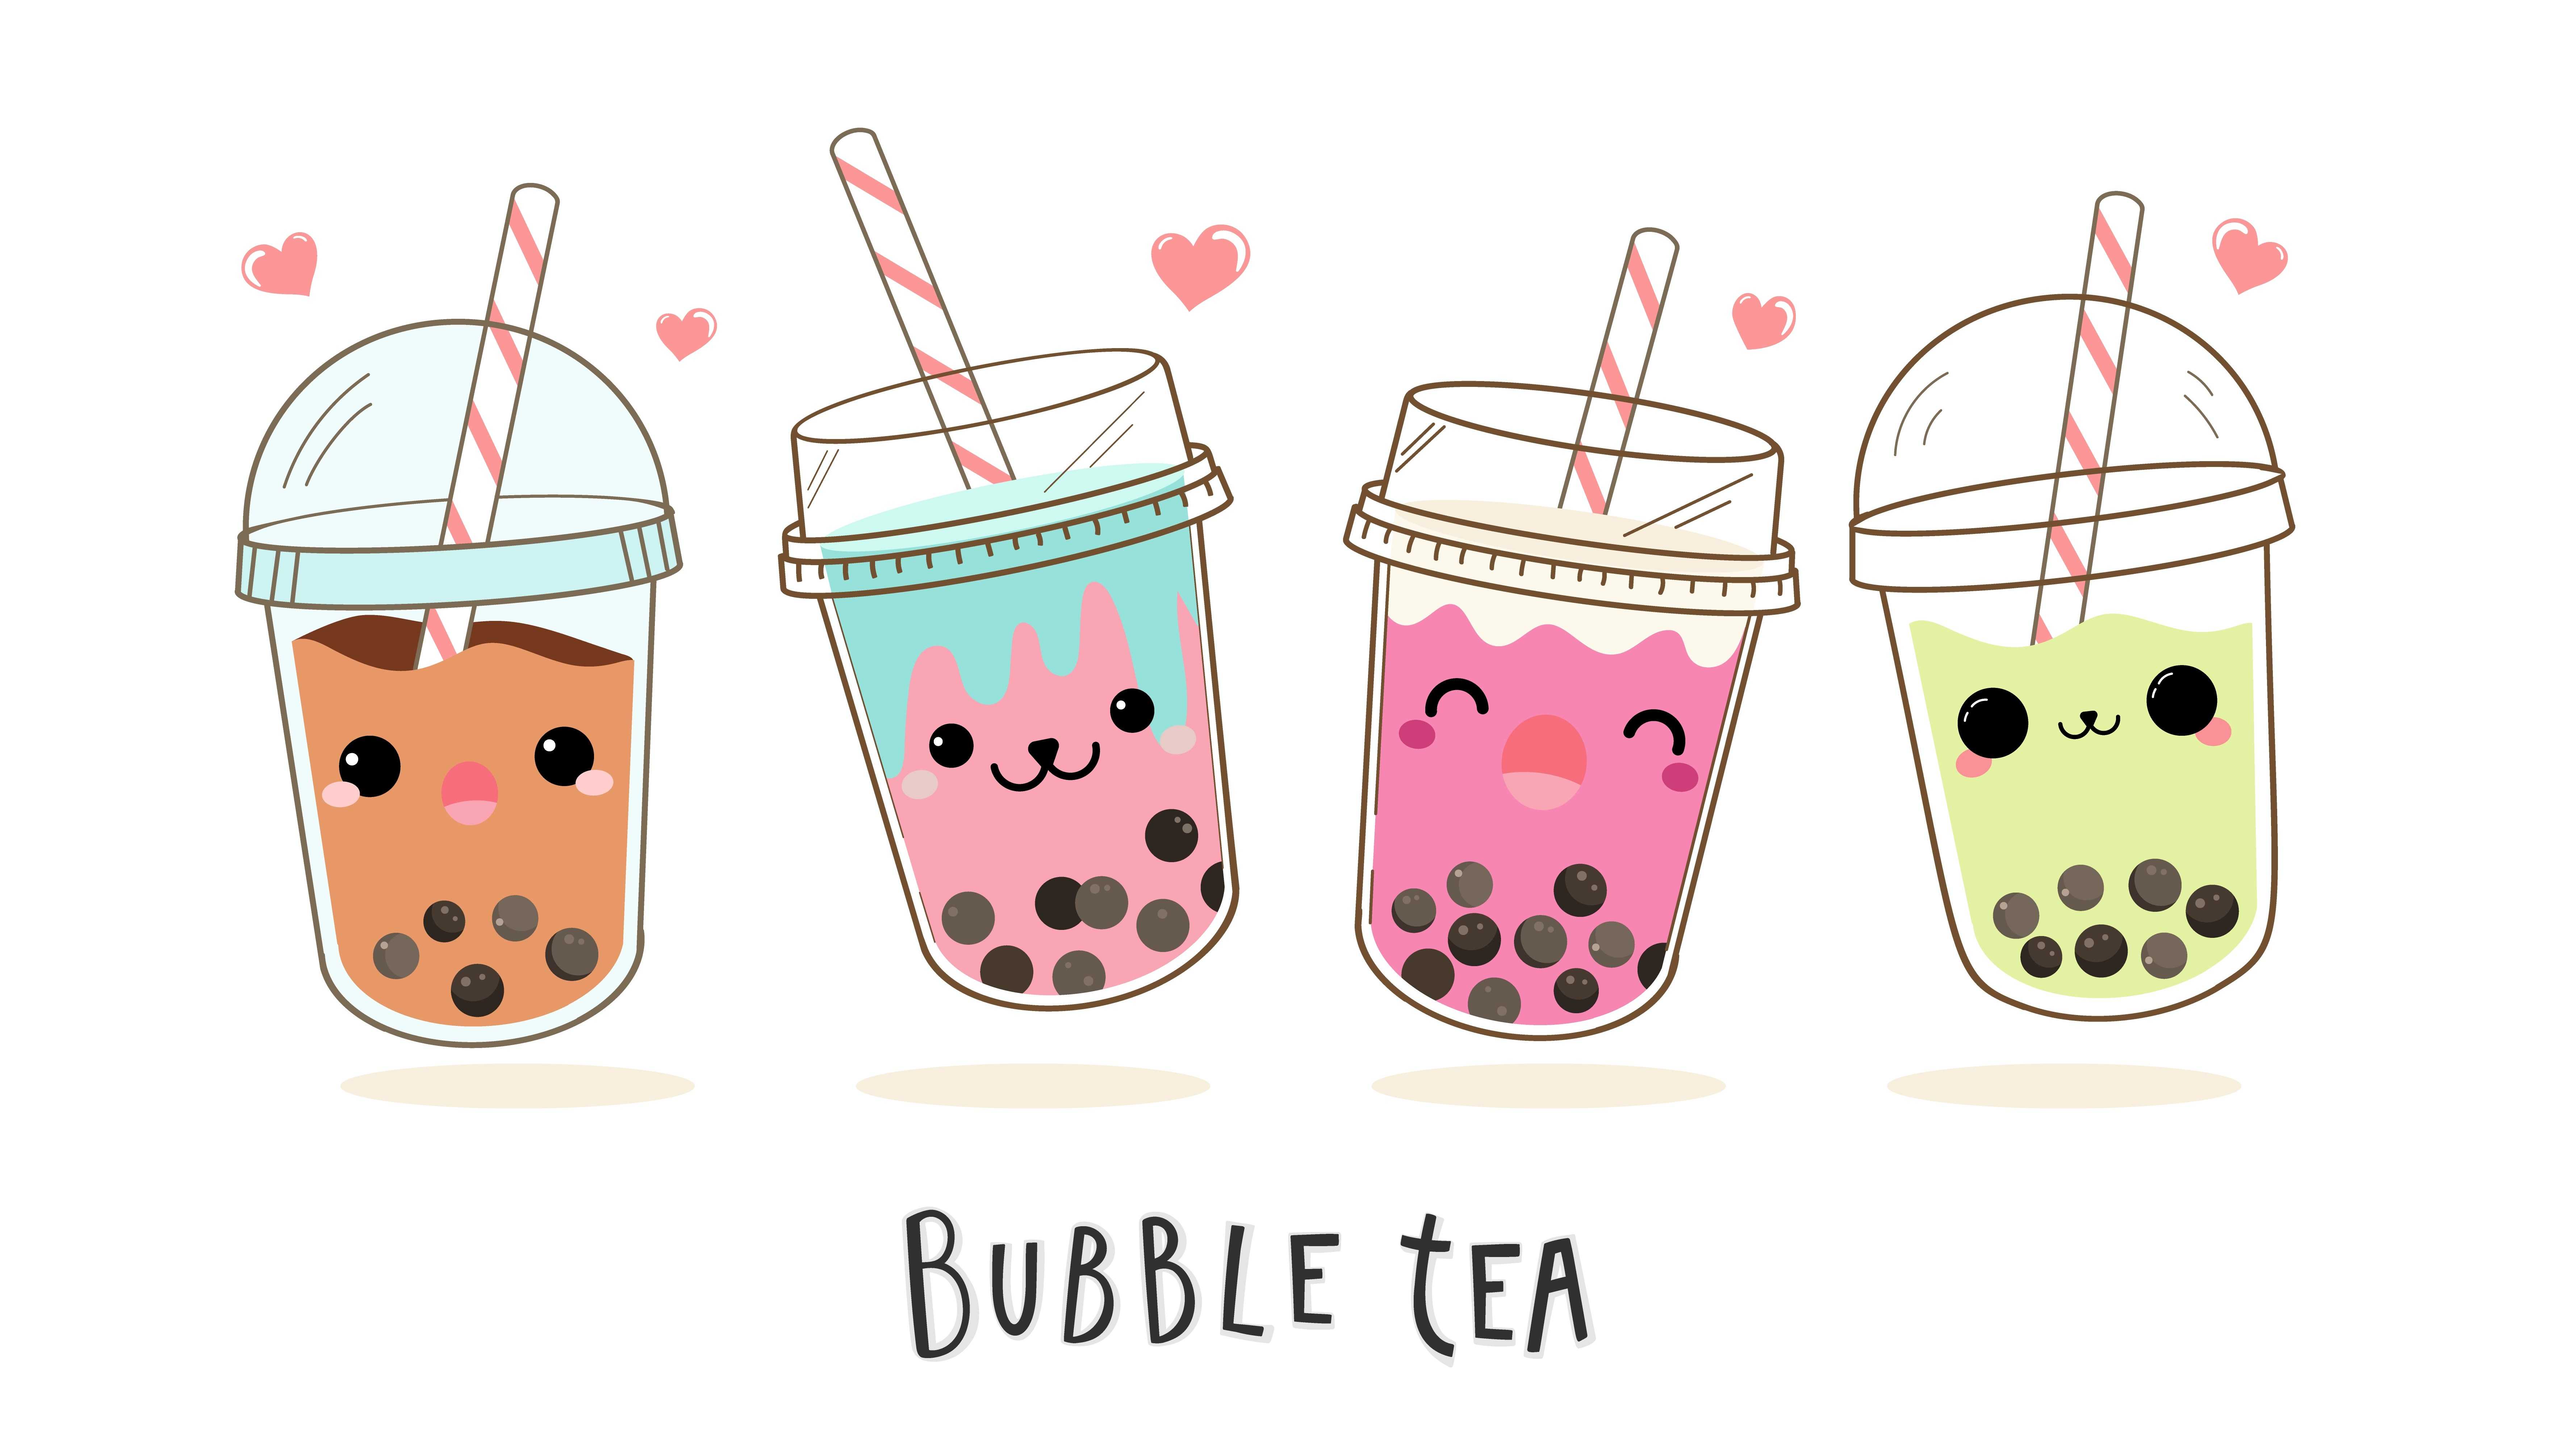 Three bubble tea cups with cute faces - Boba